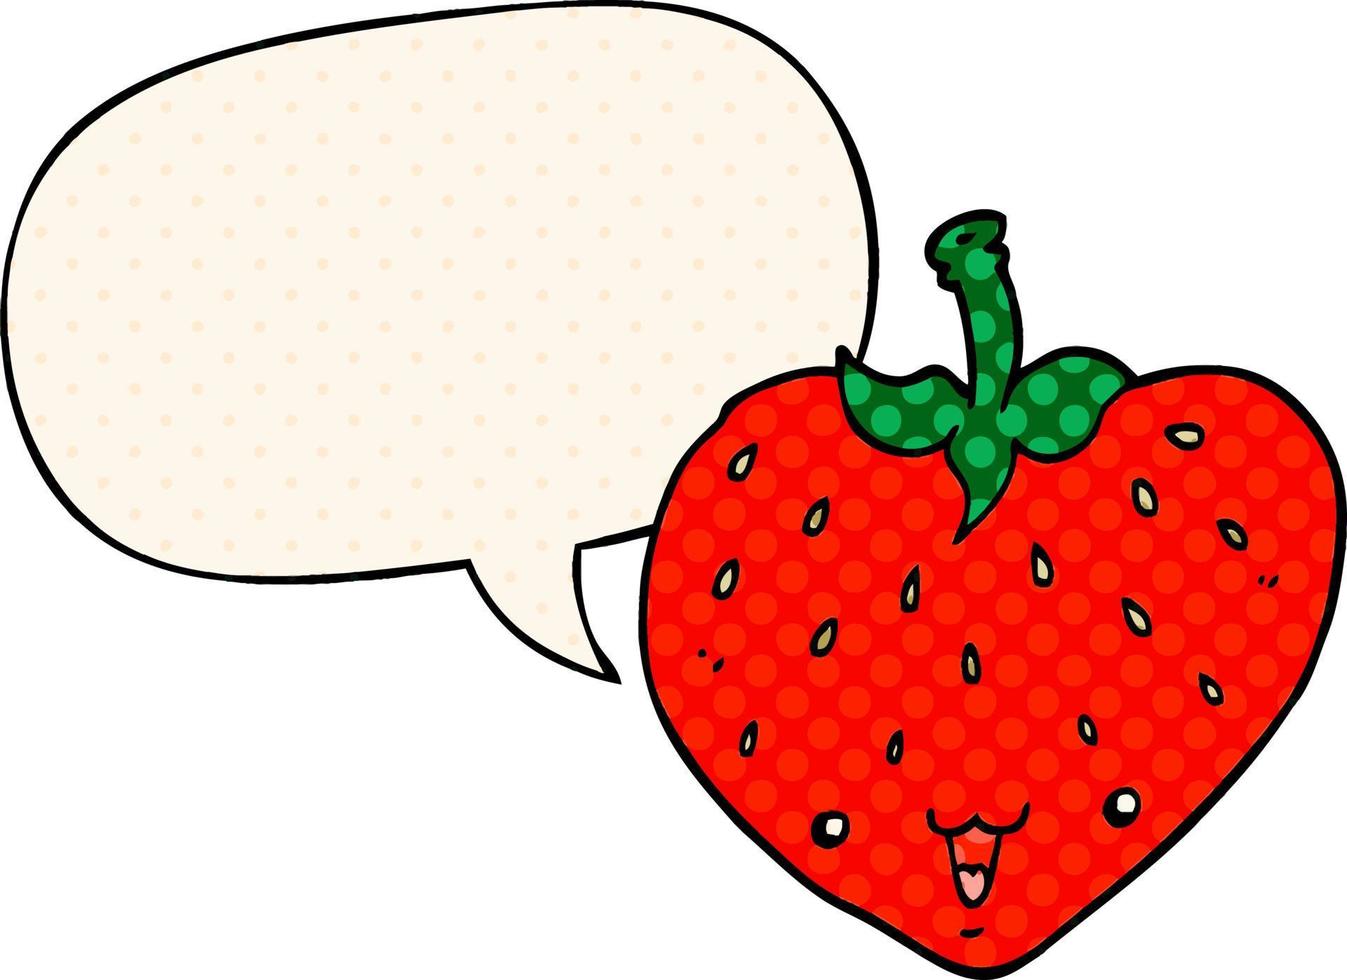 cartoon strawberry and speech bubble in comic book style vector